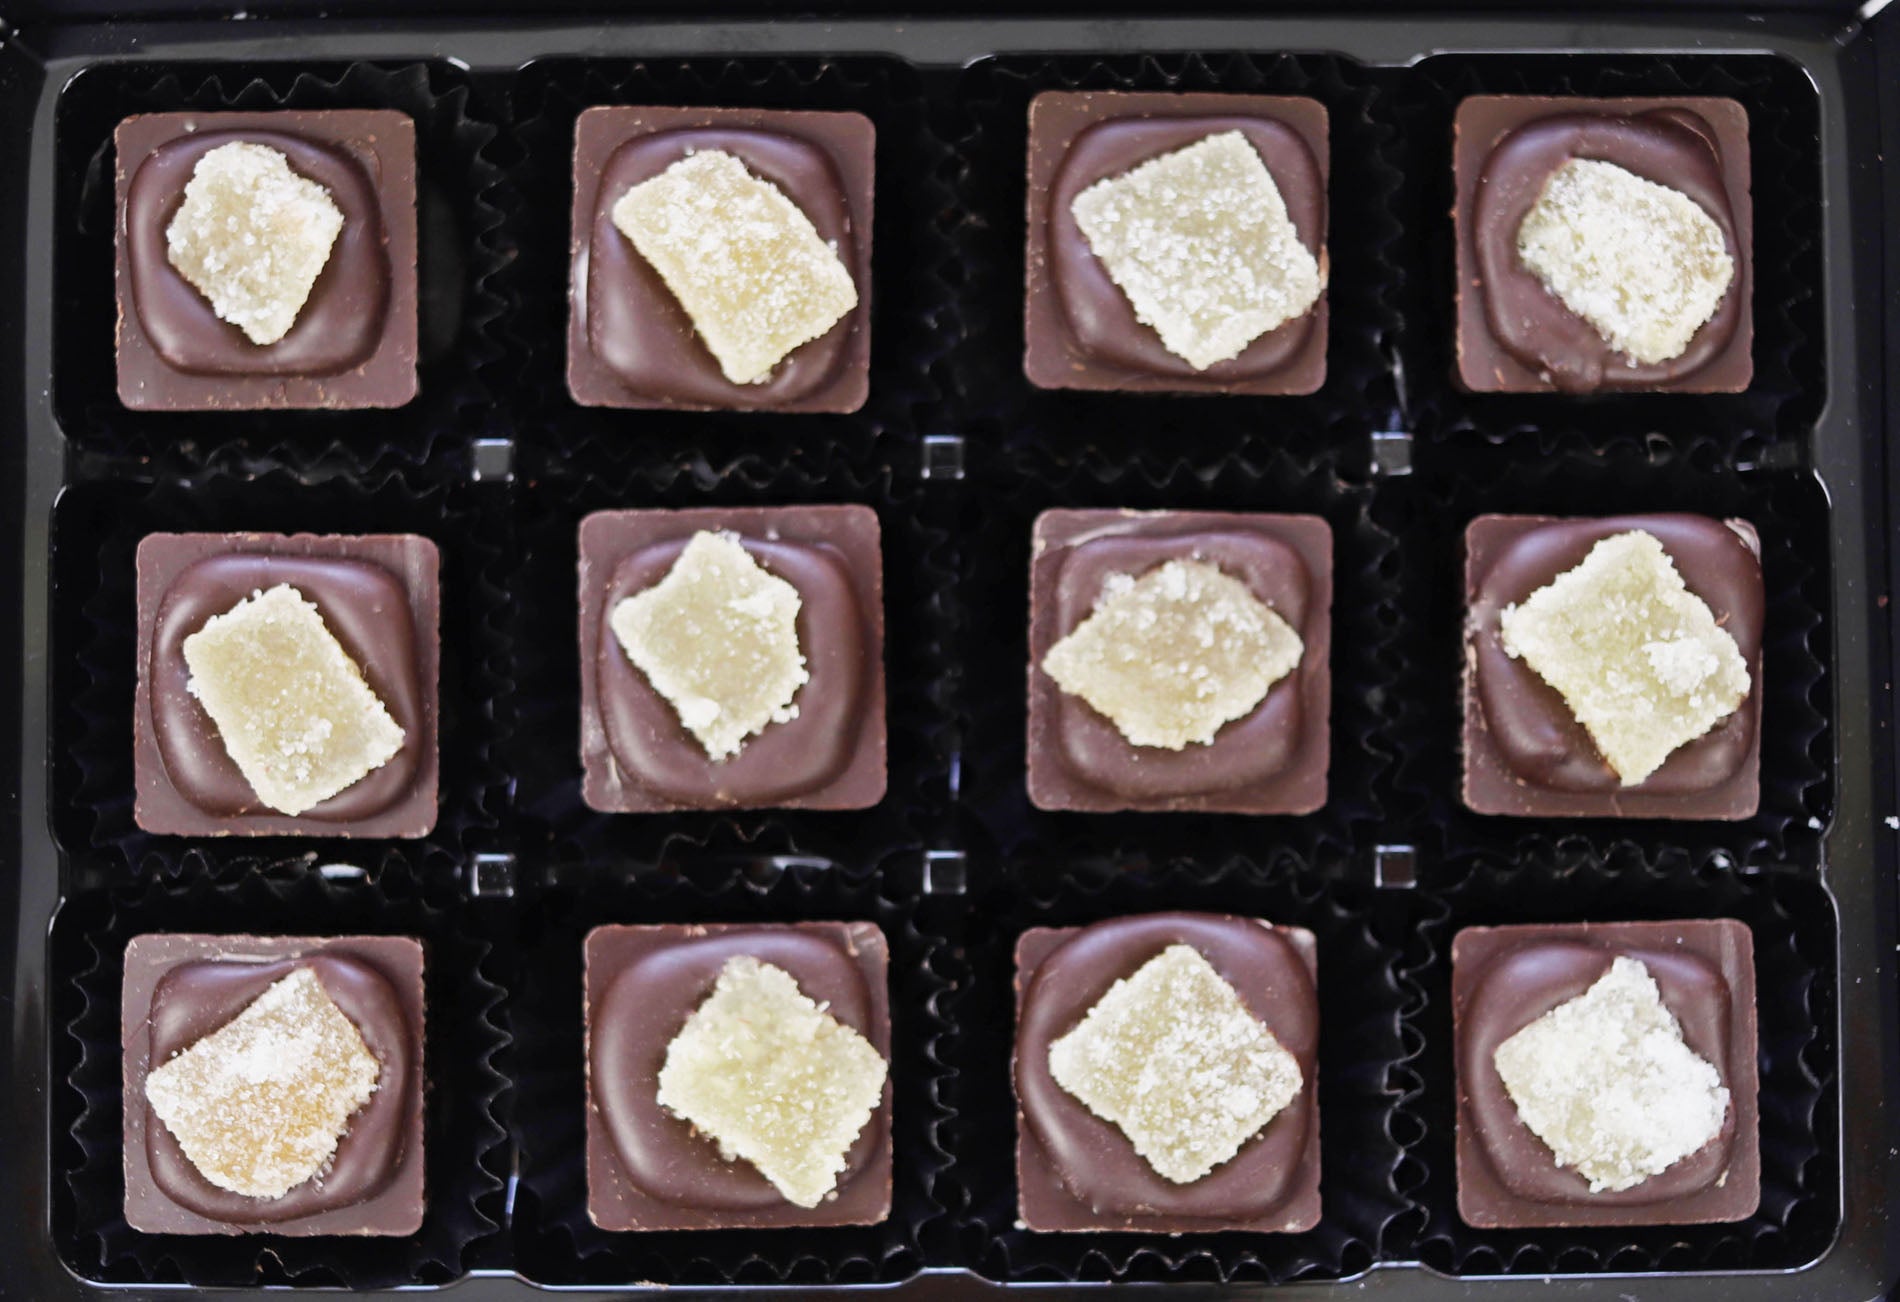 Image shows a gift box of 12 hand made dark, ginger cream filled chocolates, topped with crystallised ginger.